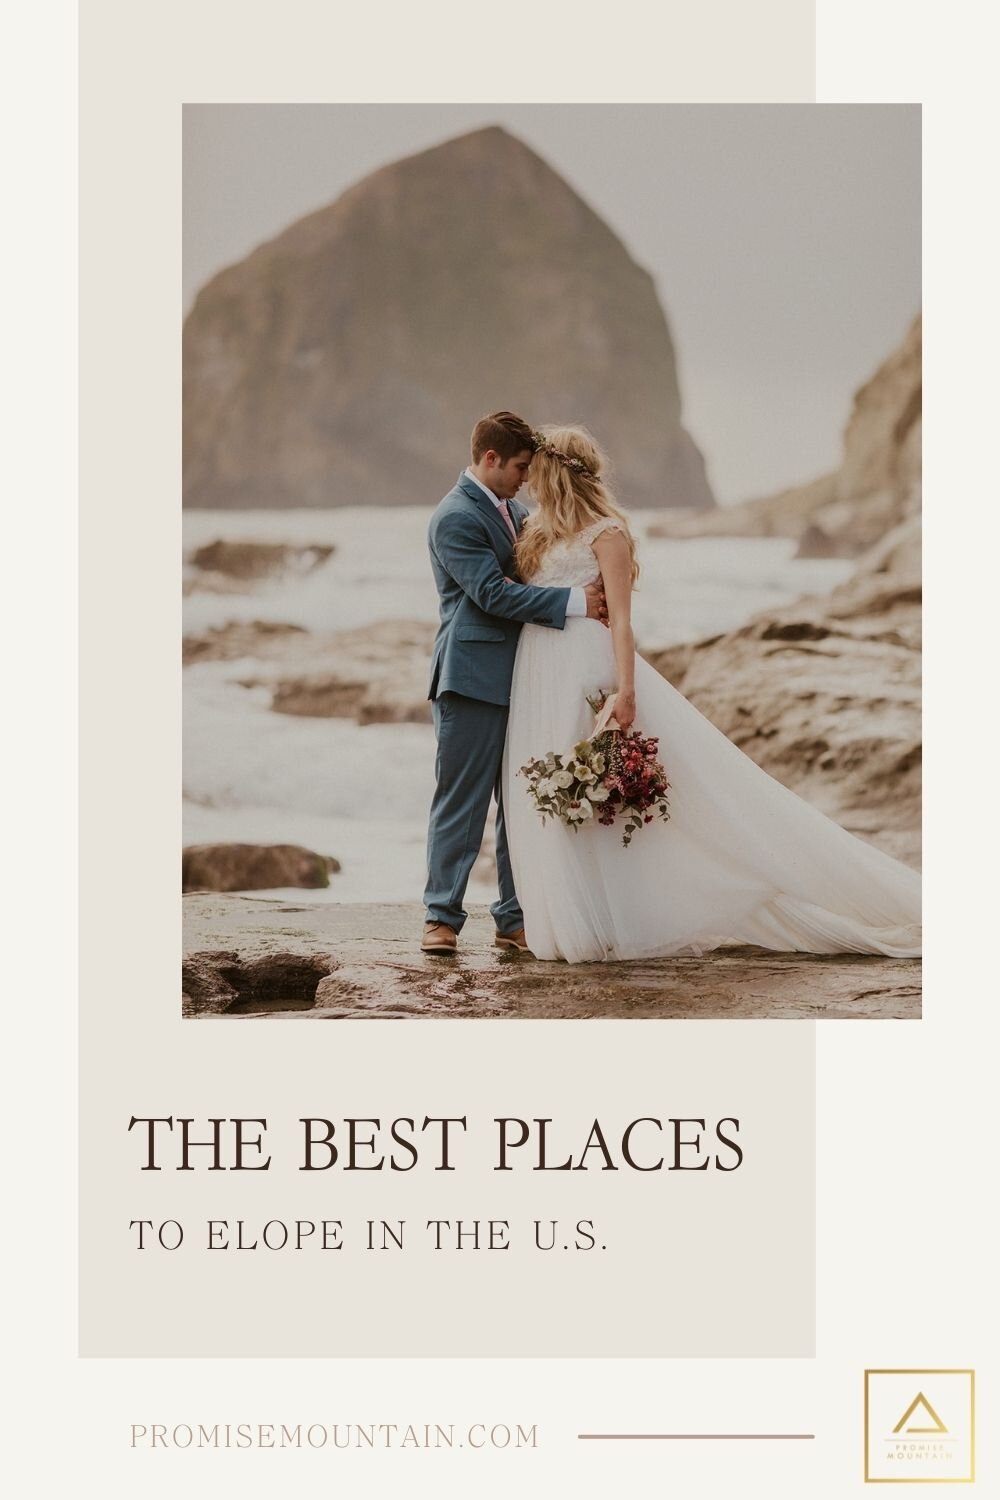 Bride and groom share a hug in front of a beach location; image overlaid with text that reads The Best Places to Elope in The U.S.